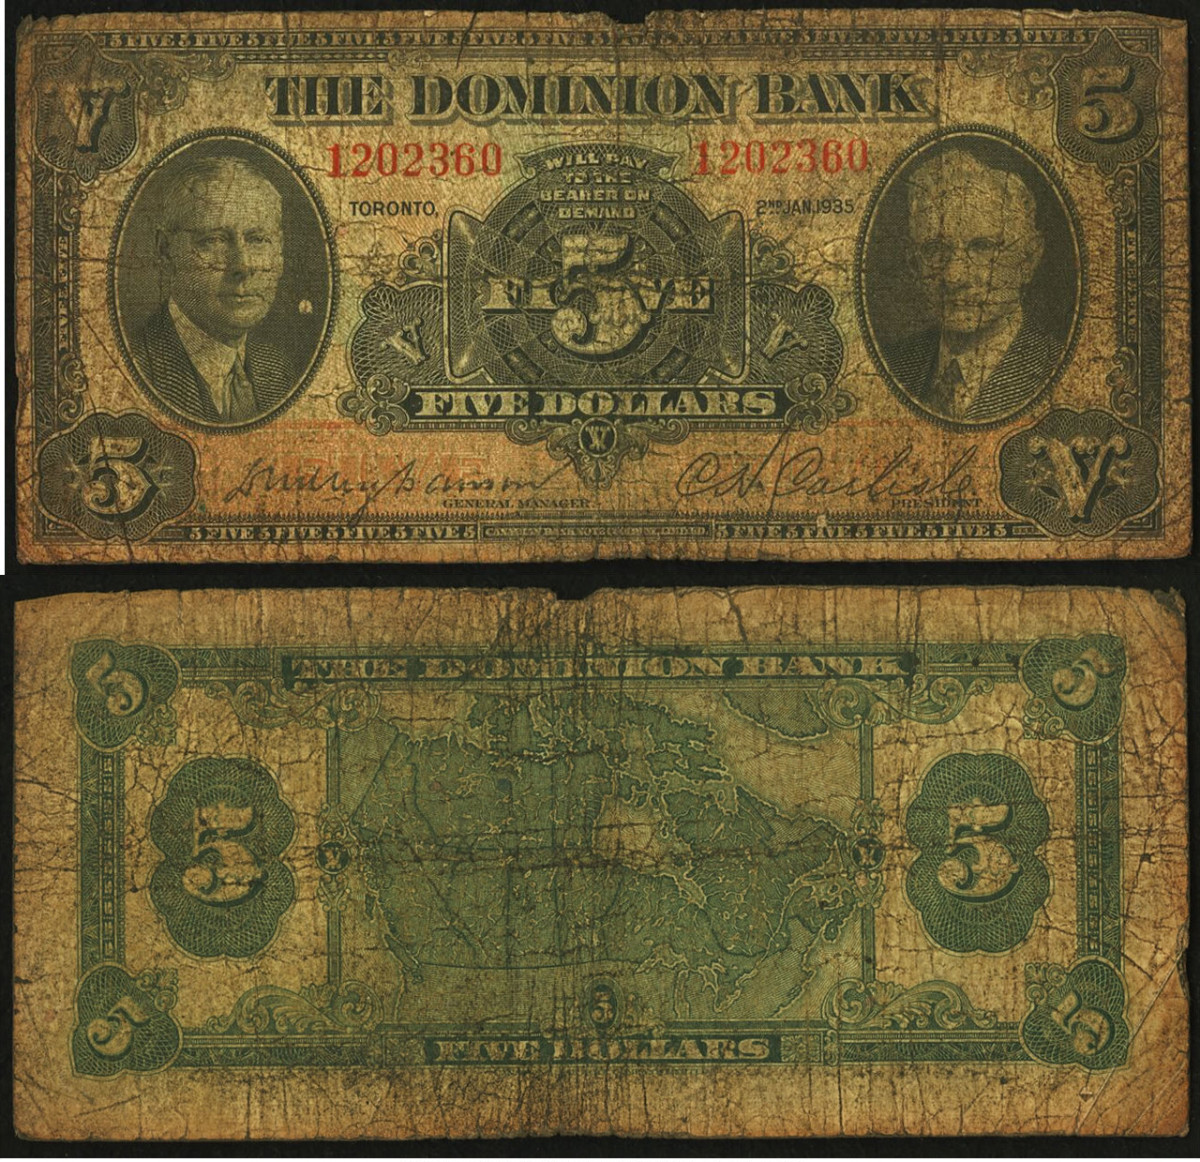 A 1935 $5 note from the Dominion Bank.